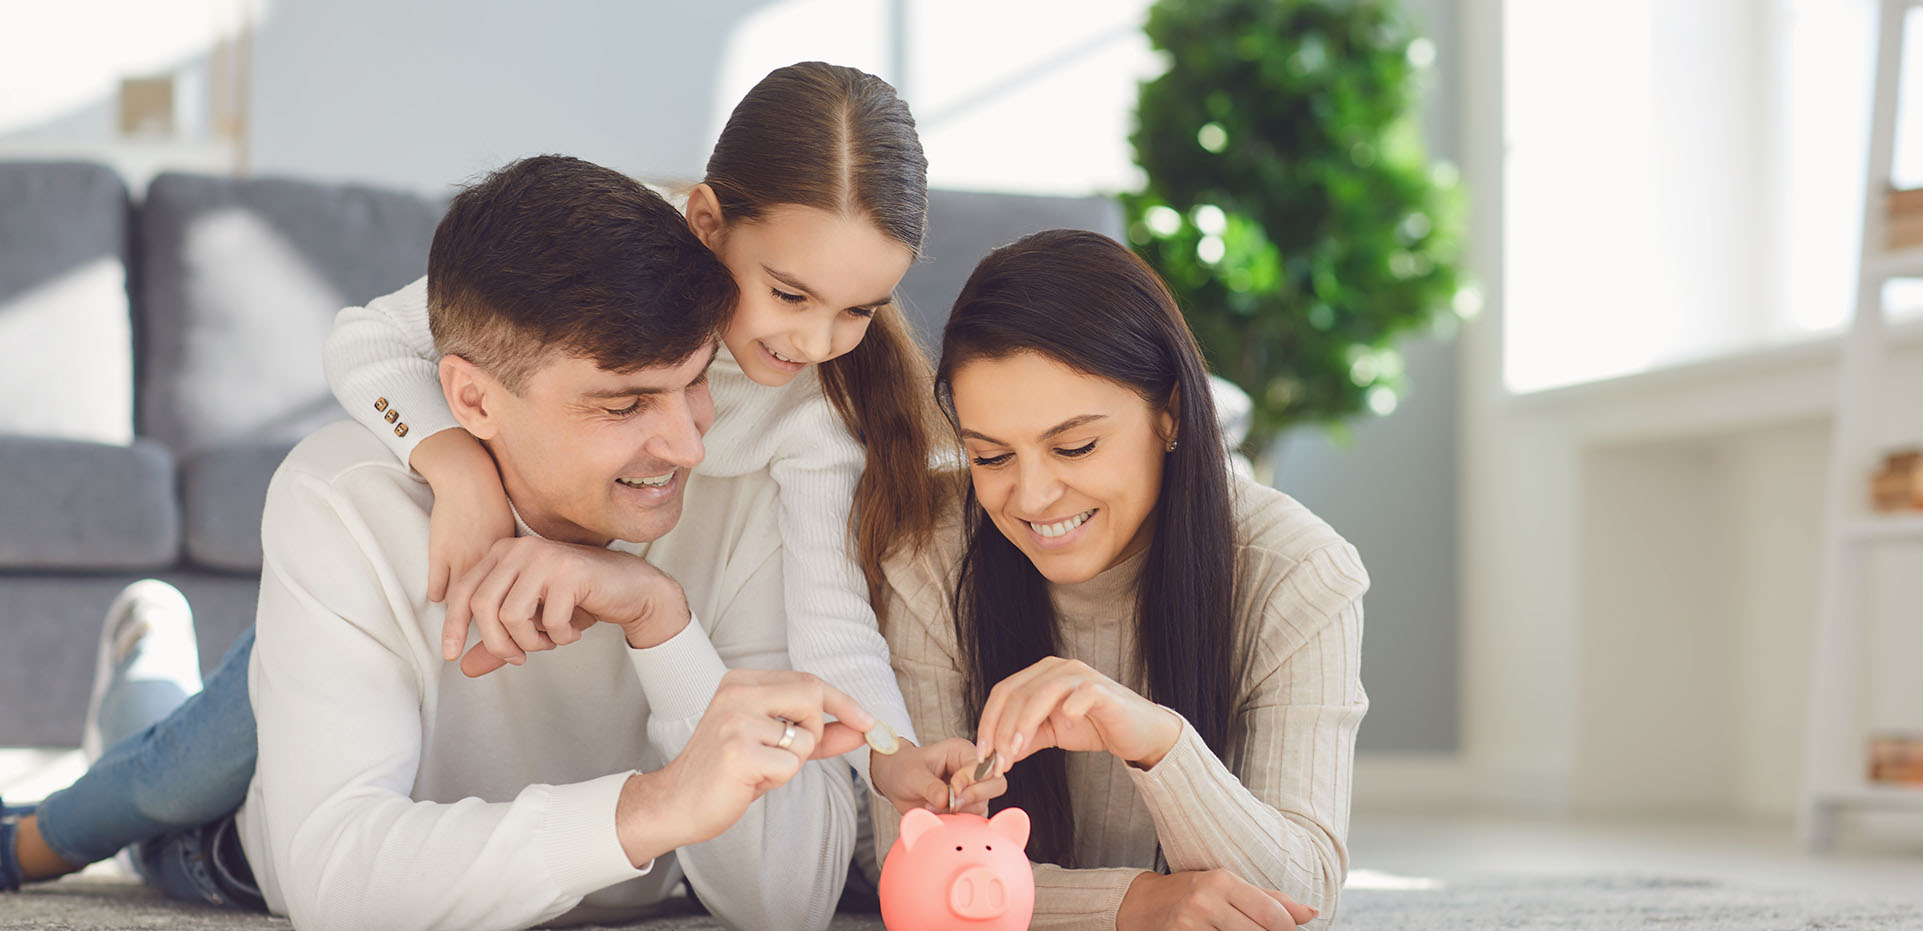 Image showing a family putting money in a piggy bank together